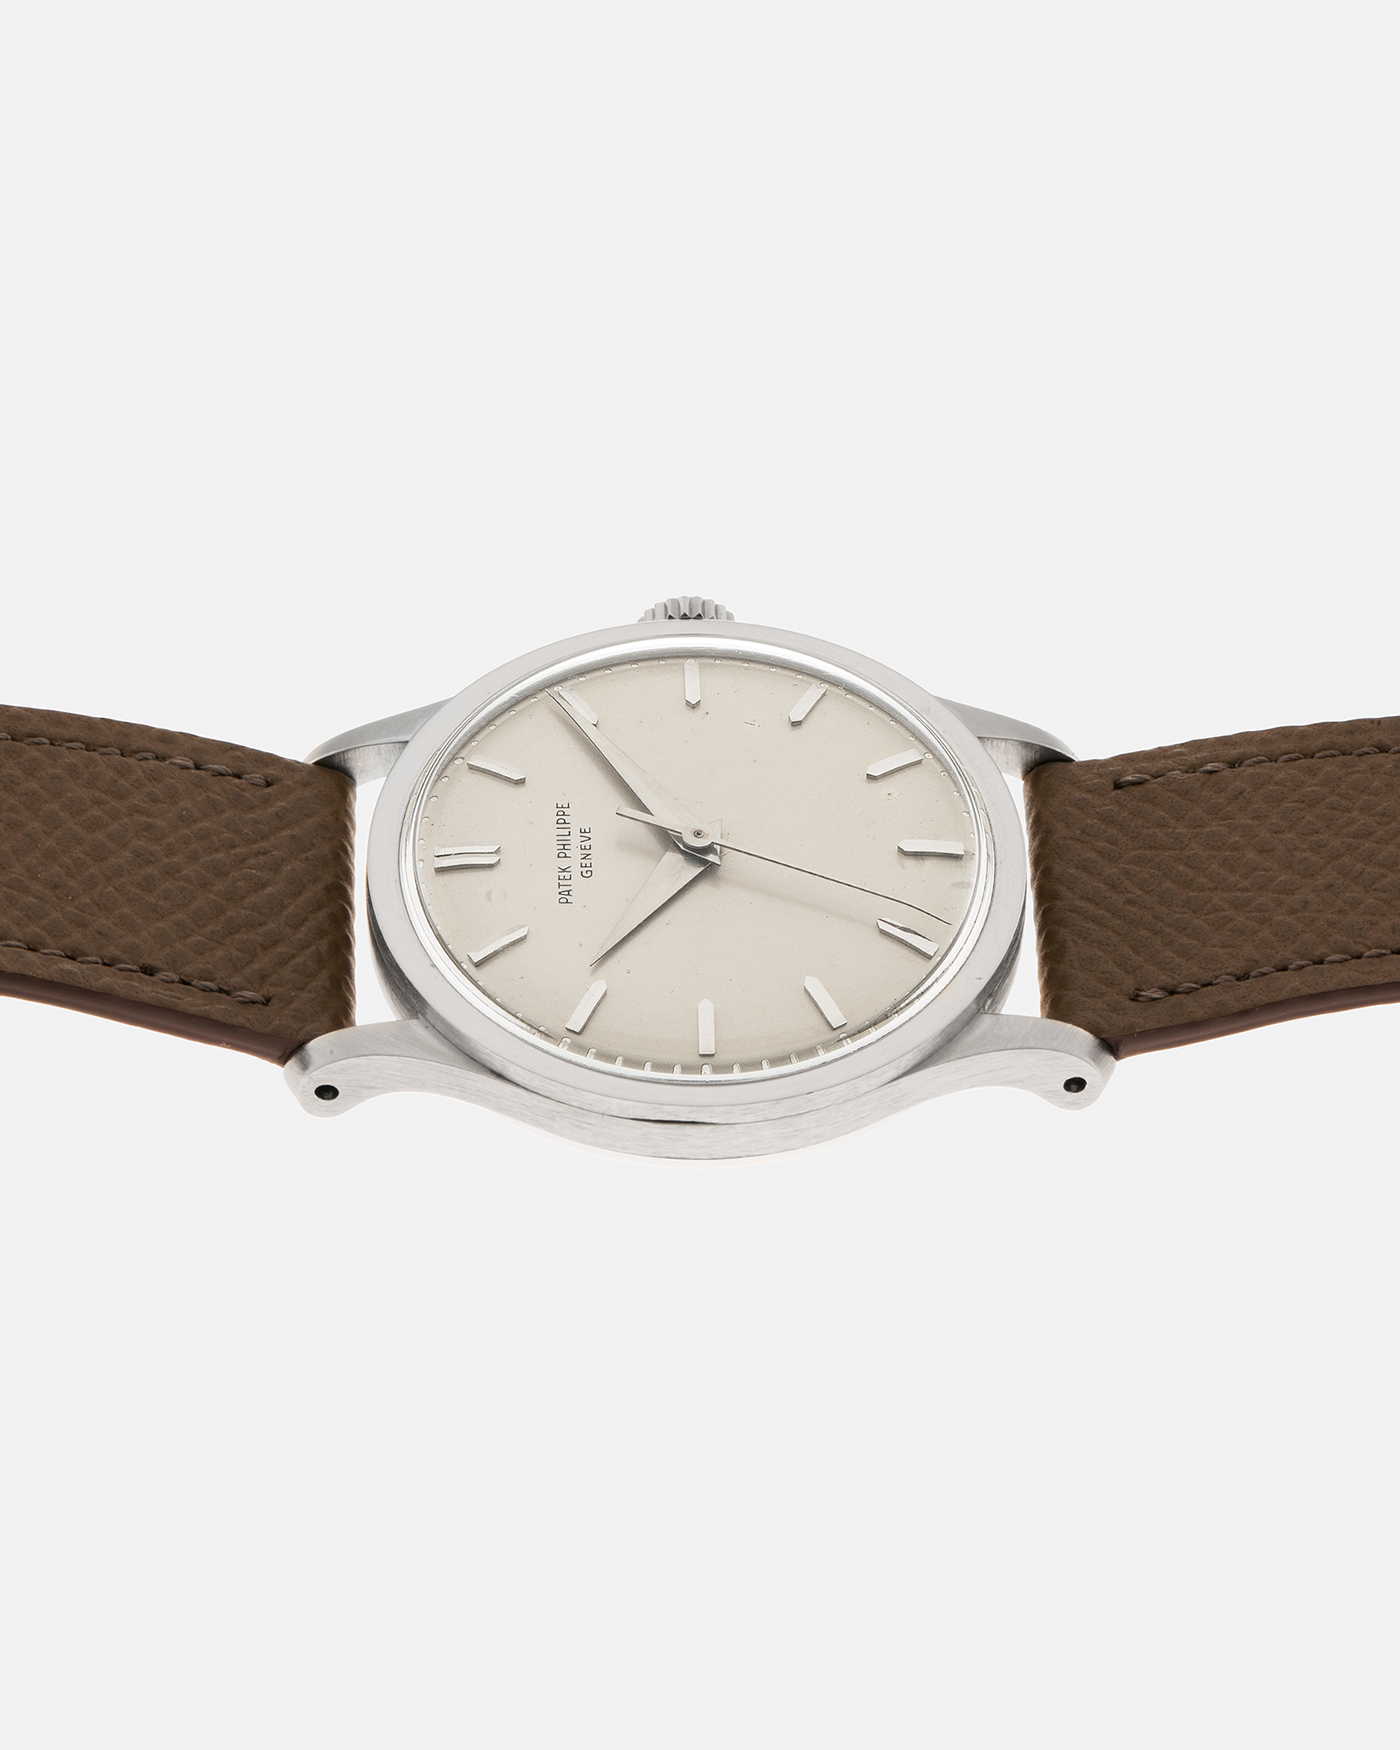 Brand: Patek Philippe Year: 1965 Model: Calatrava Reference: 570 Material: 18-carat White Gold Movement: Patek Philippe Cal. 27 SC, Manual-Winding Case Diameter: 35.5mm Lug Width: 20mm Strap: Nostime Taupe Grained Calf Leather Strap, additional Generic Black Alligator Leather Strap with Signed 18-carat White Gold Tang Buckle